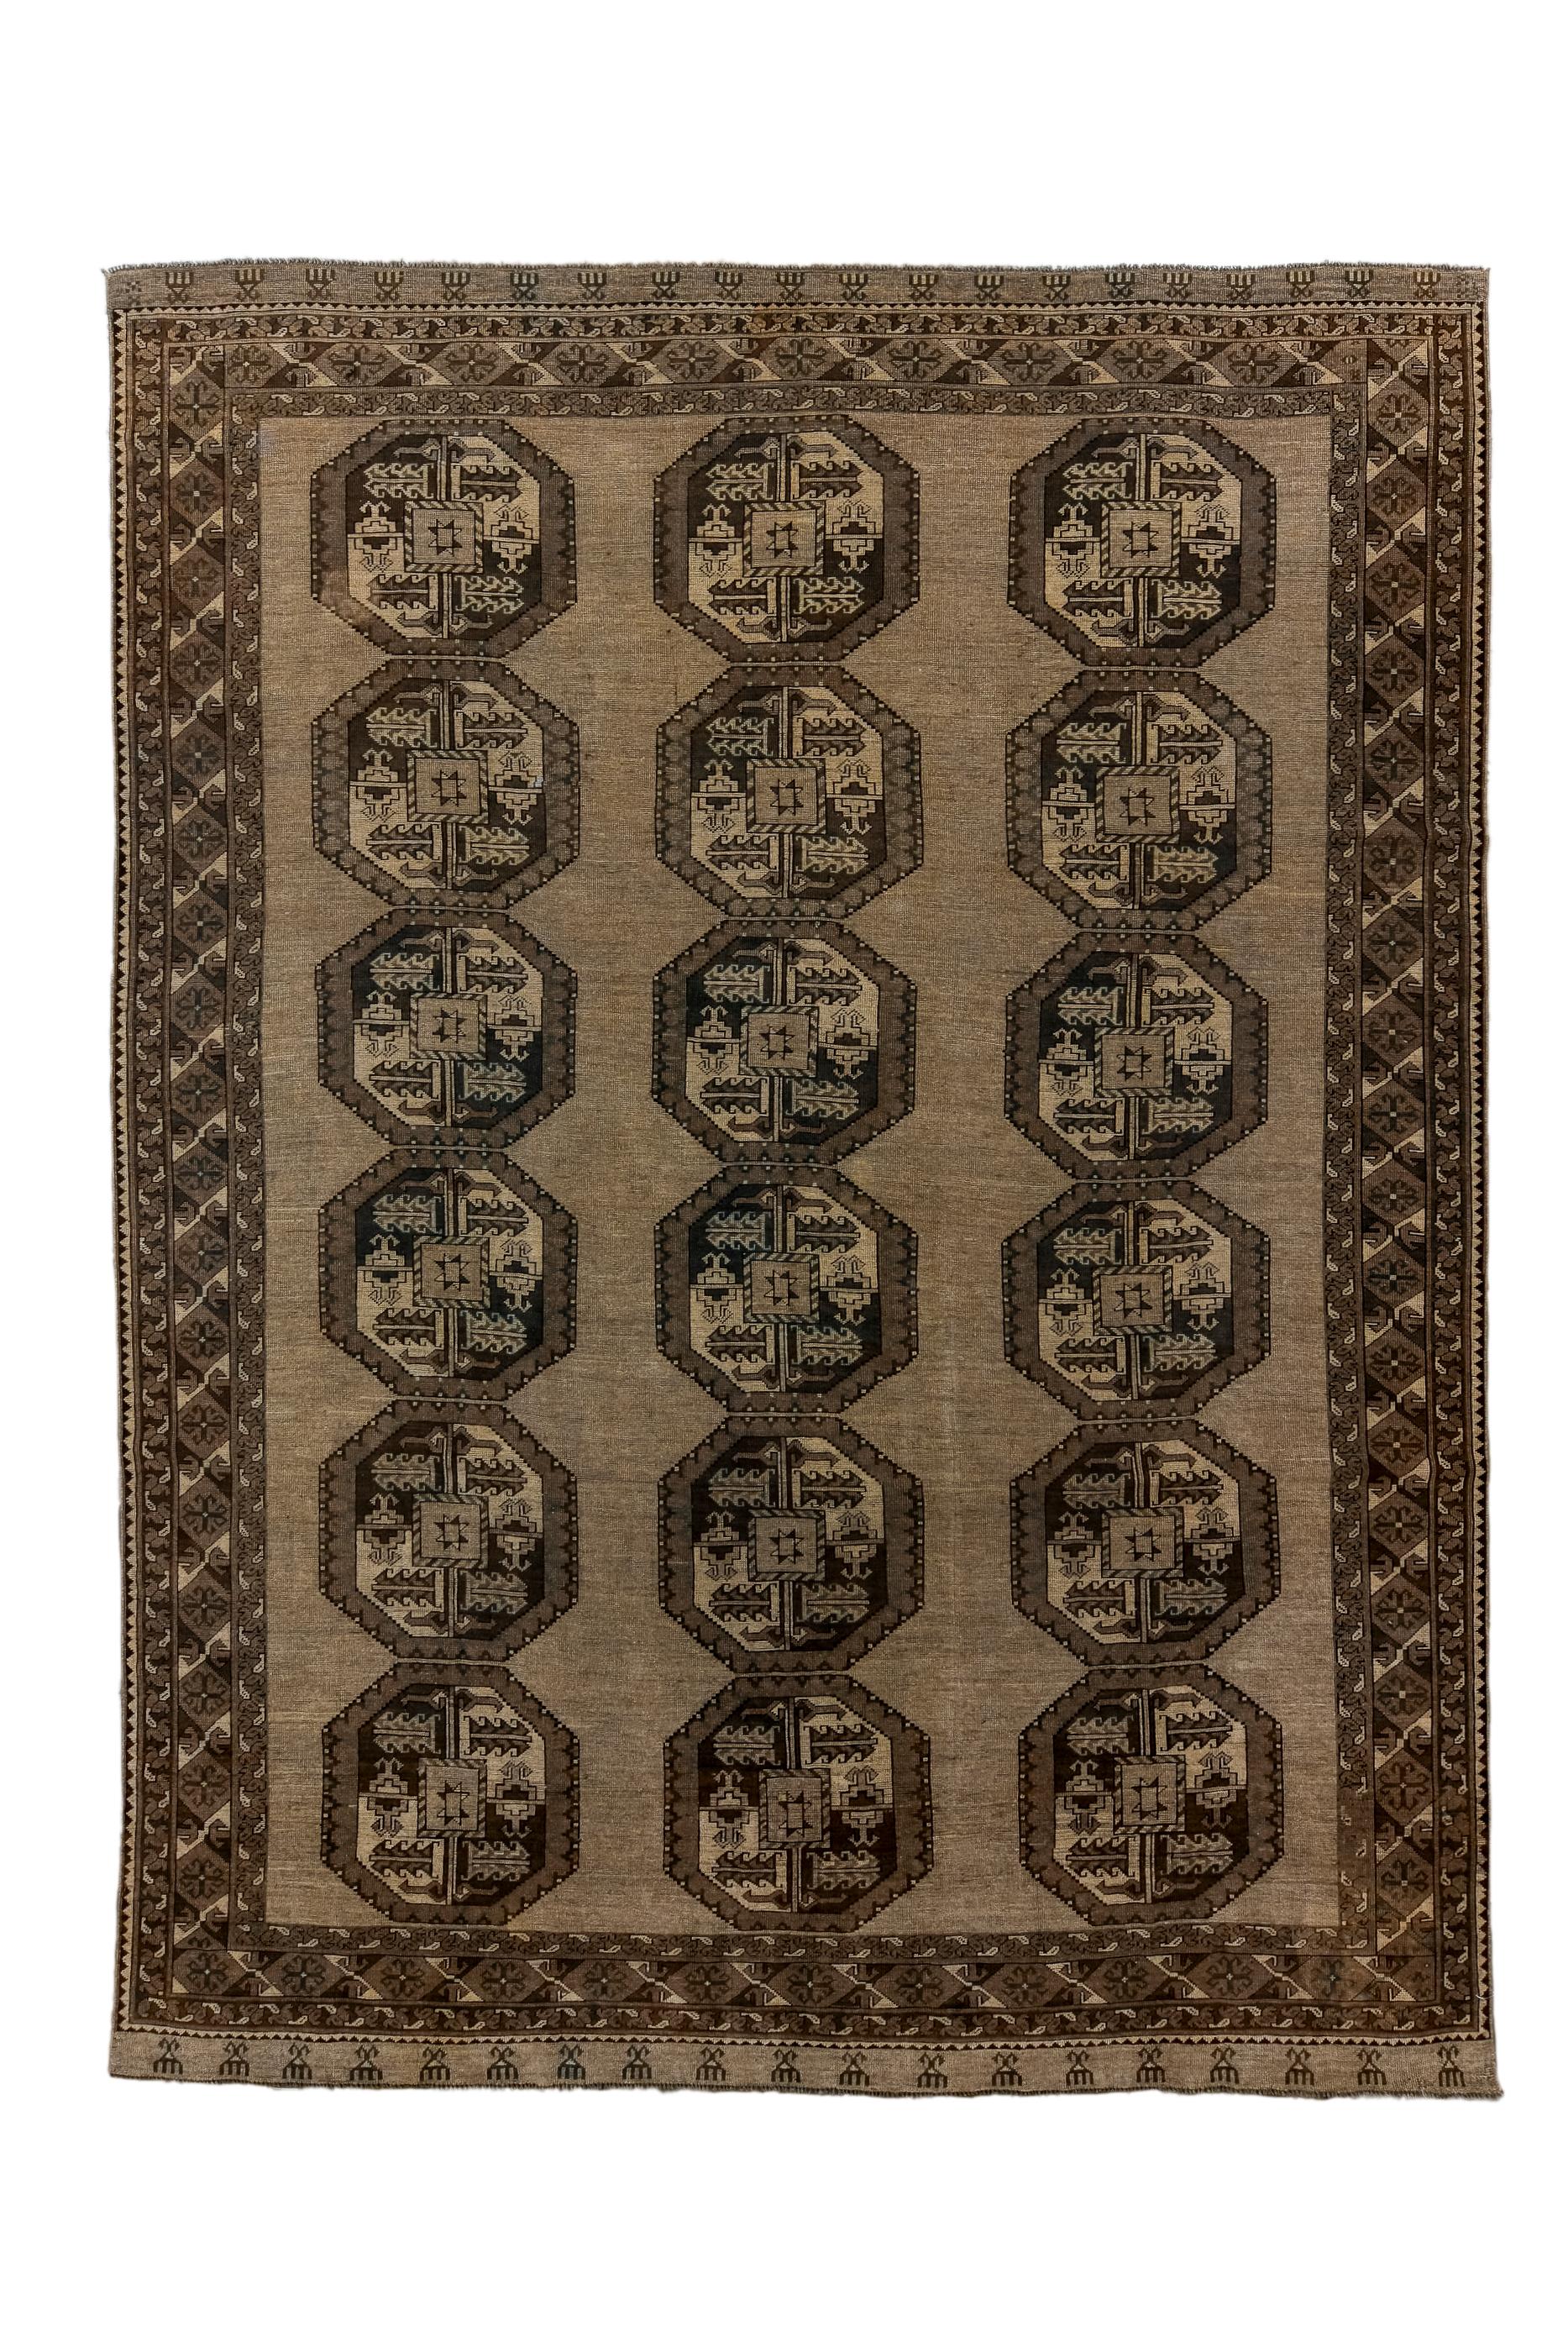 The light brown field shows three spaciously set columns of six octagonal “Ongurghe” guls without, unusually any minor guls.  This presents a particularly direct, primitive effect. Major border with X’s and hexagons. Moderate/coarse weave, all-wool